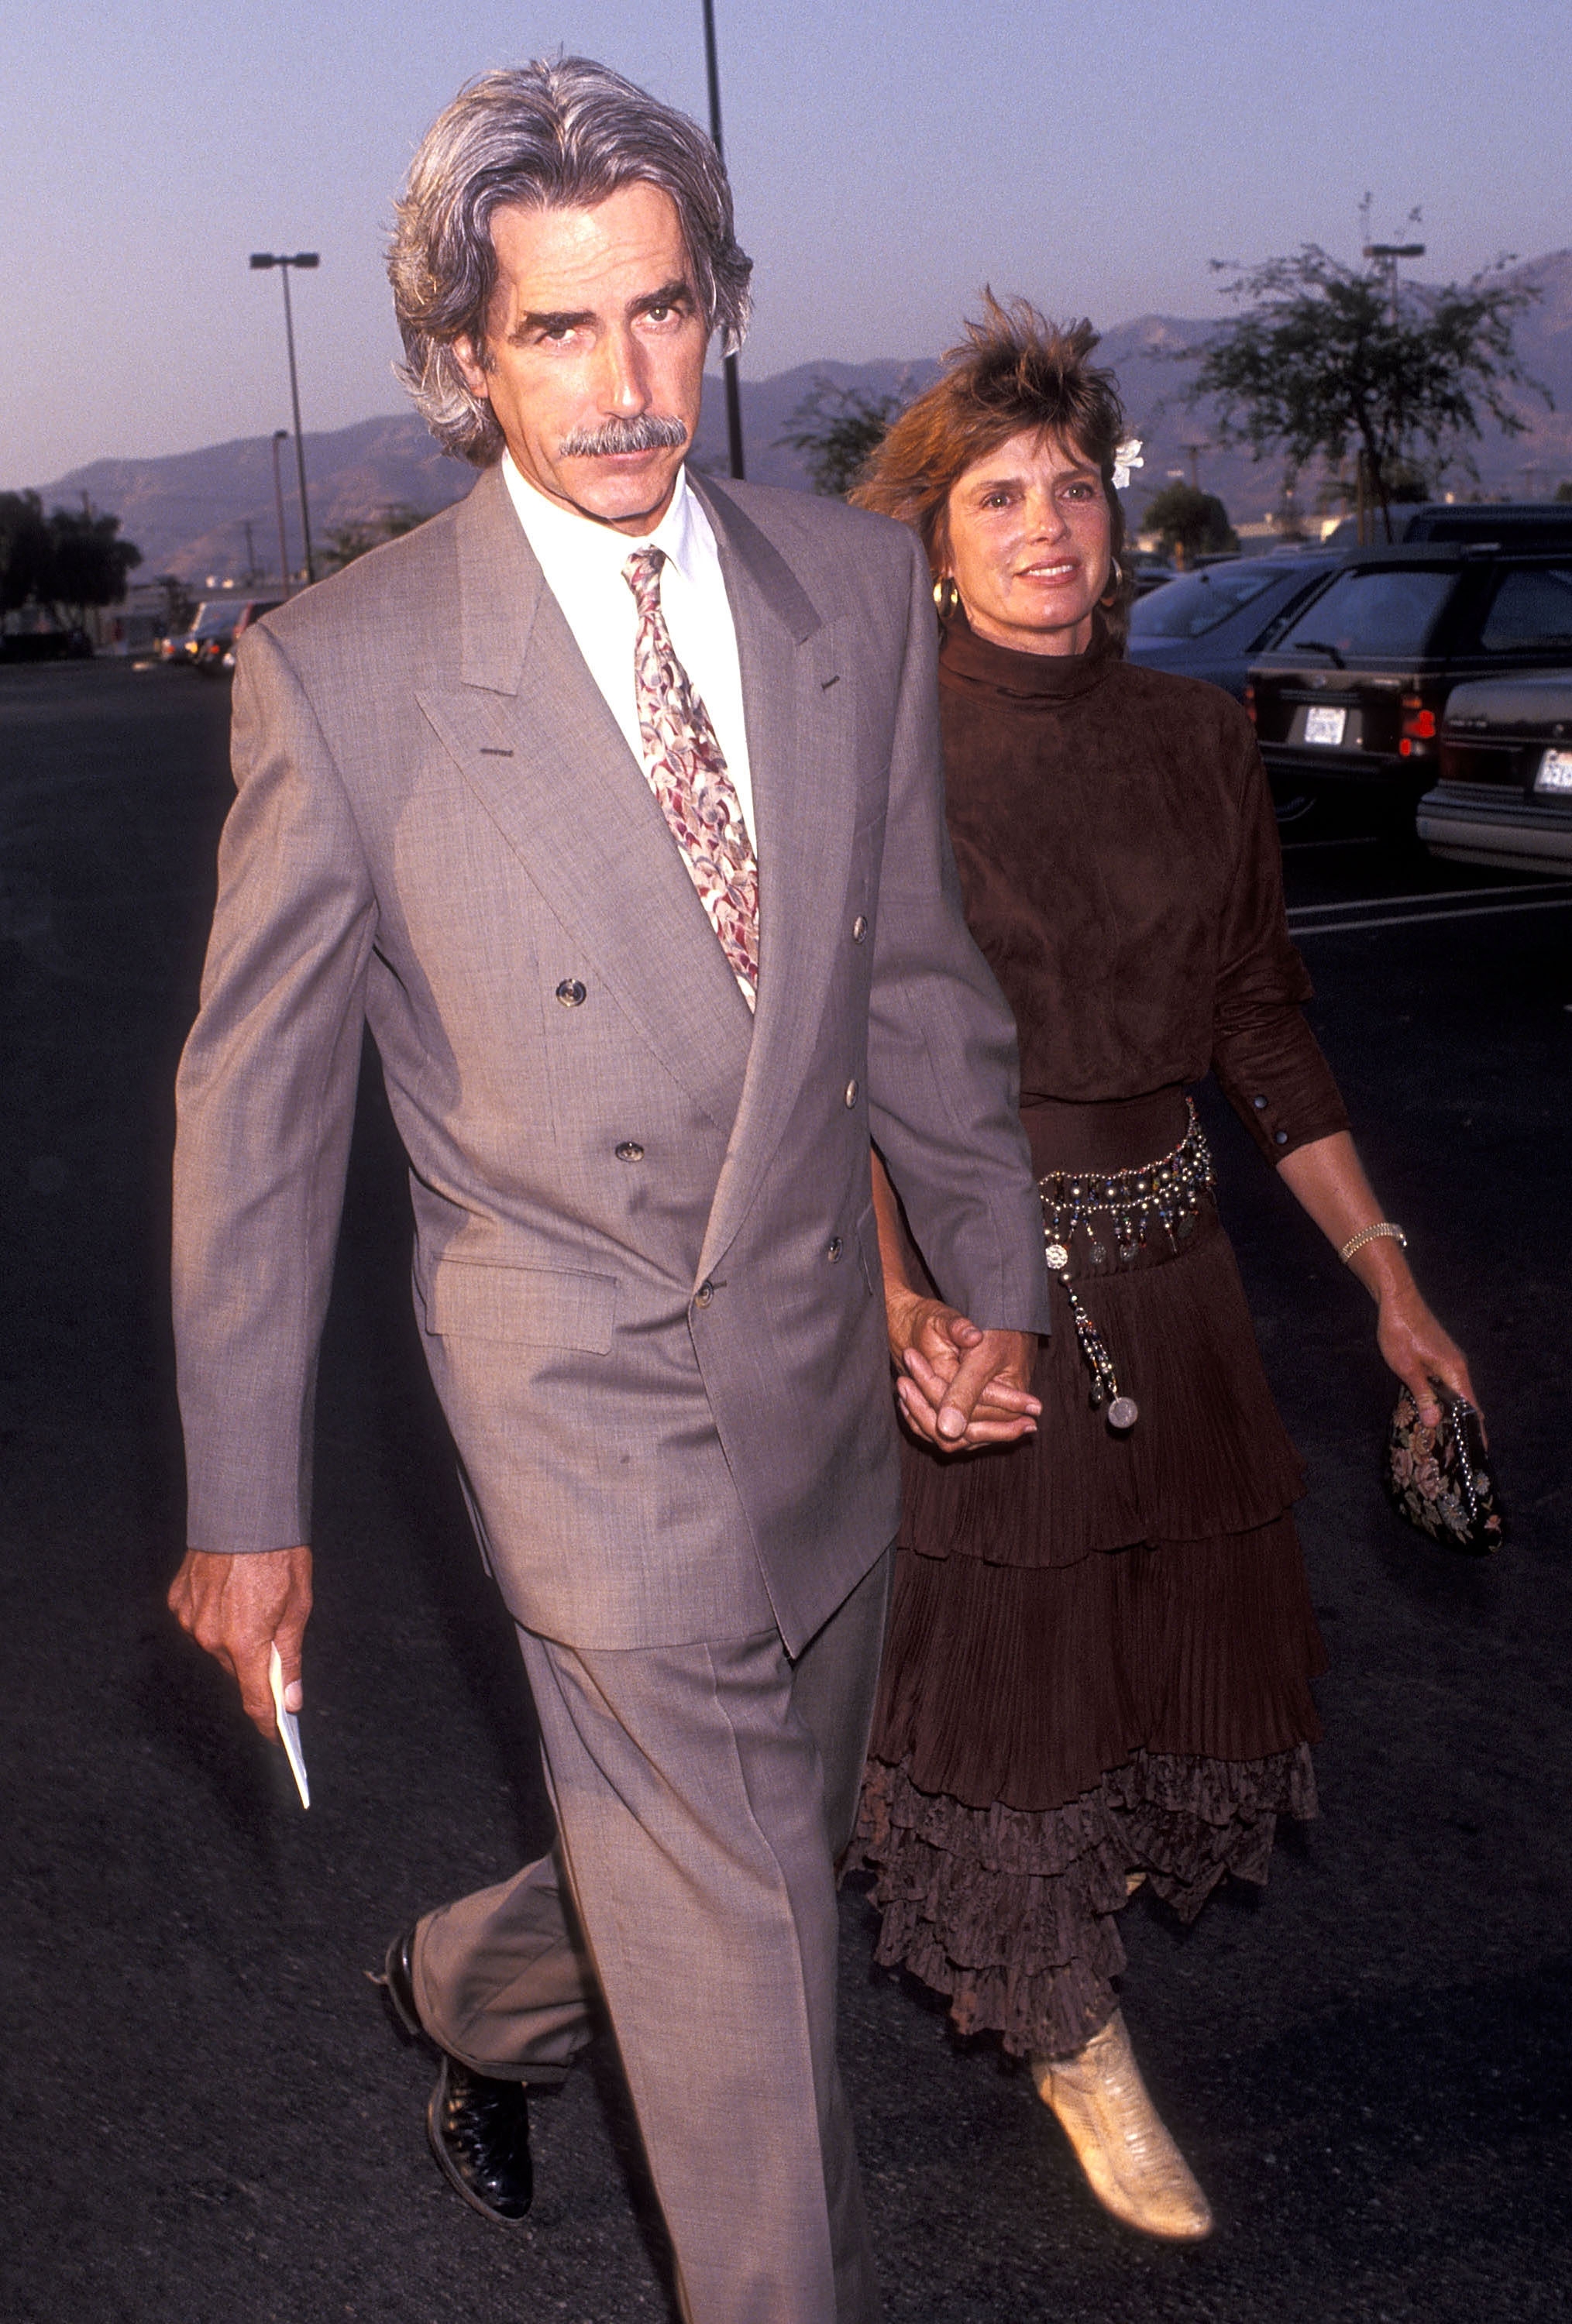 Sam Elliott and Katharine Ross at the Motion Picture & Television Fund's Ninth Annual Golden Boot Awards on August 17, 1991, in California.  │ Source: Getty Images